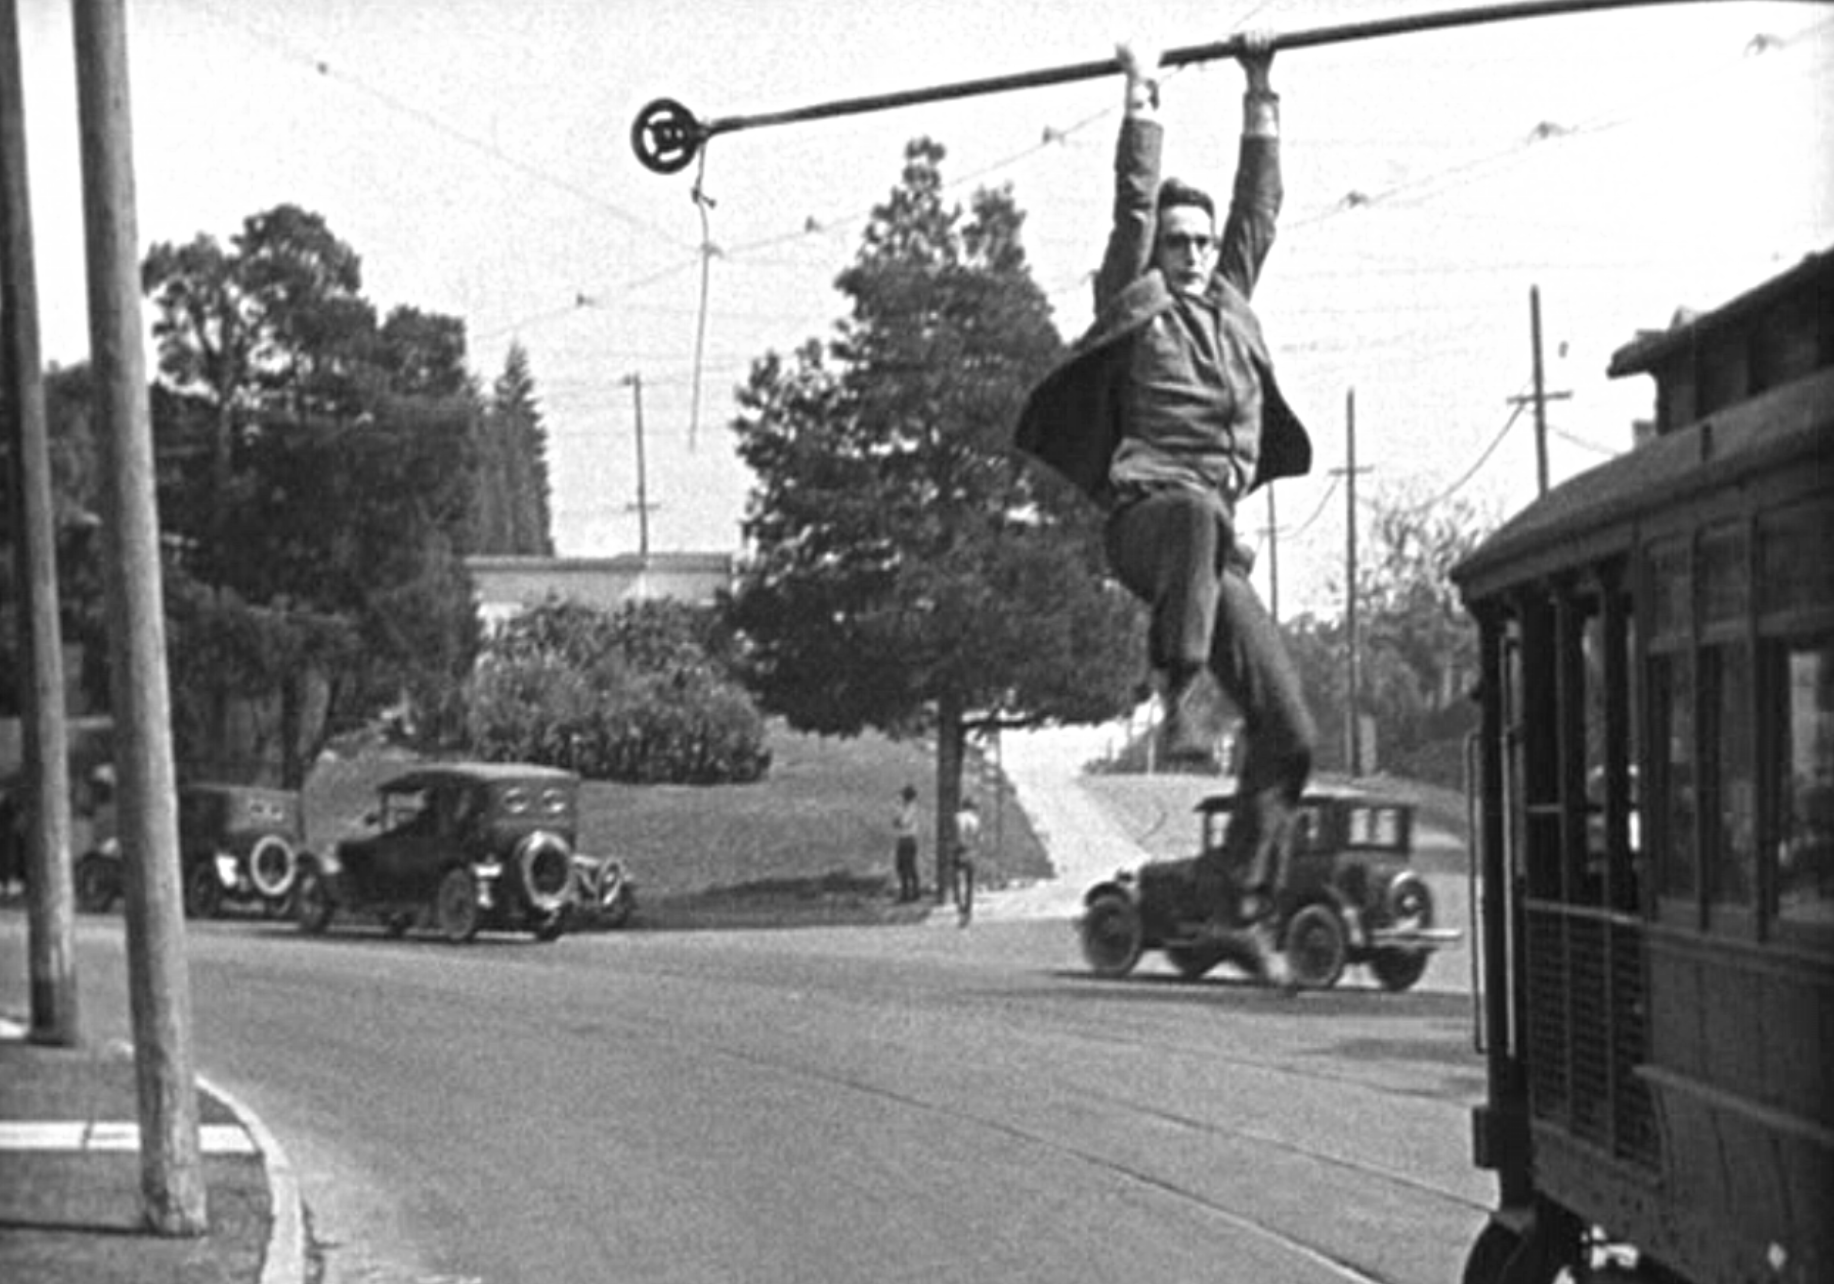 12 Pics From the Silent Film Era That Prove OSHA Didn't Exist Yet